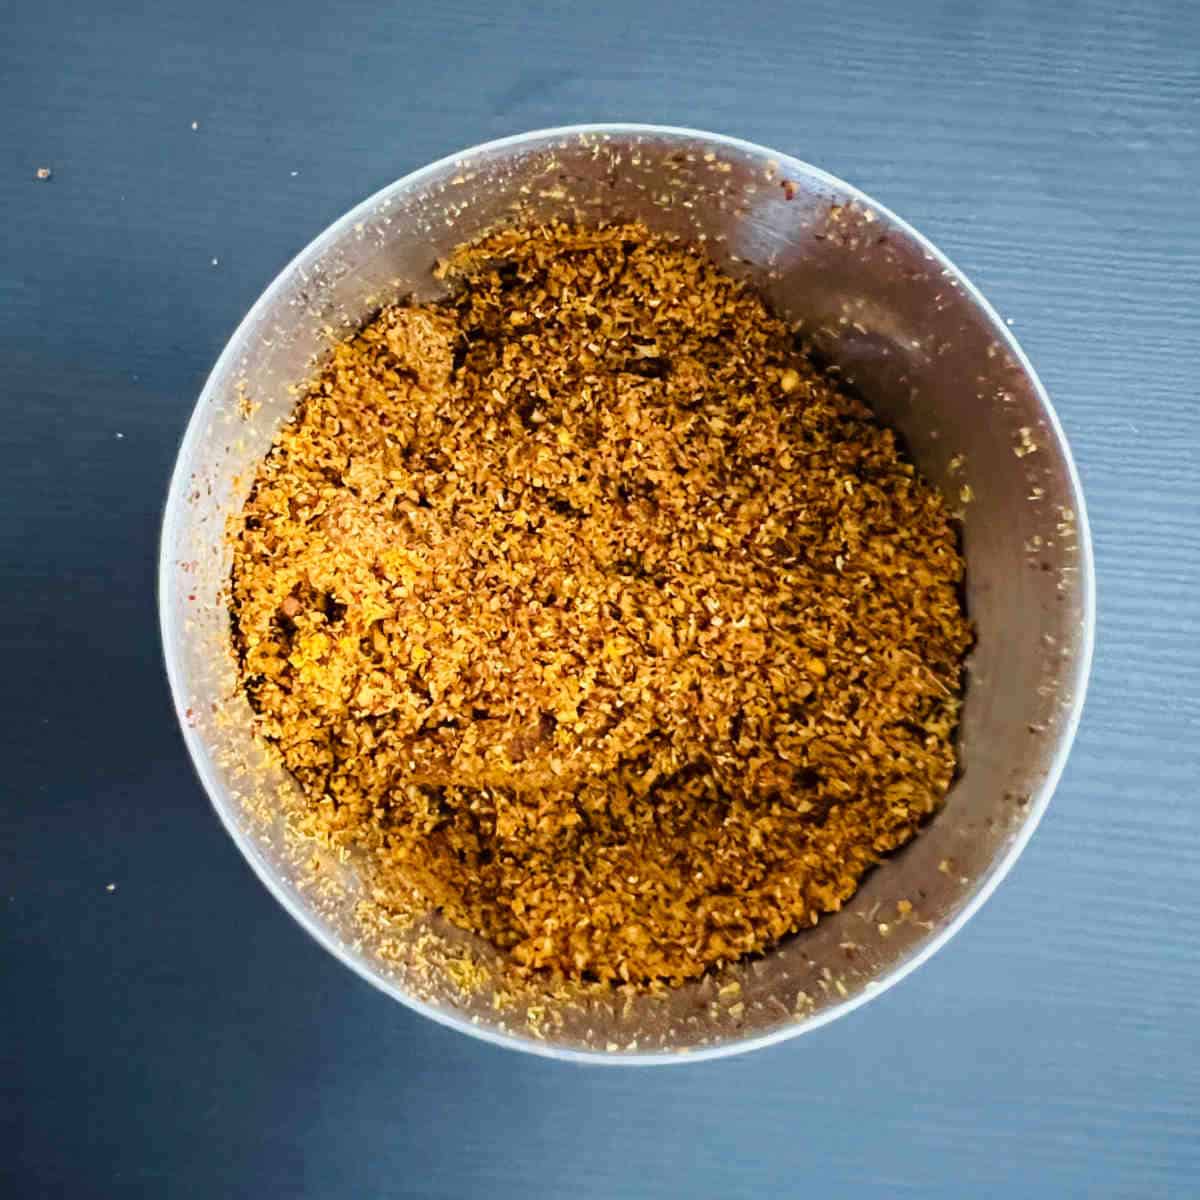 Grind the whole spices into fine powder.